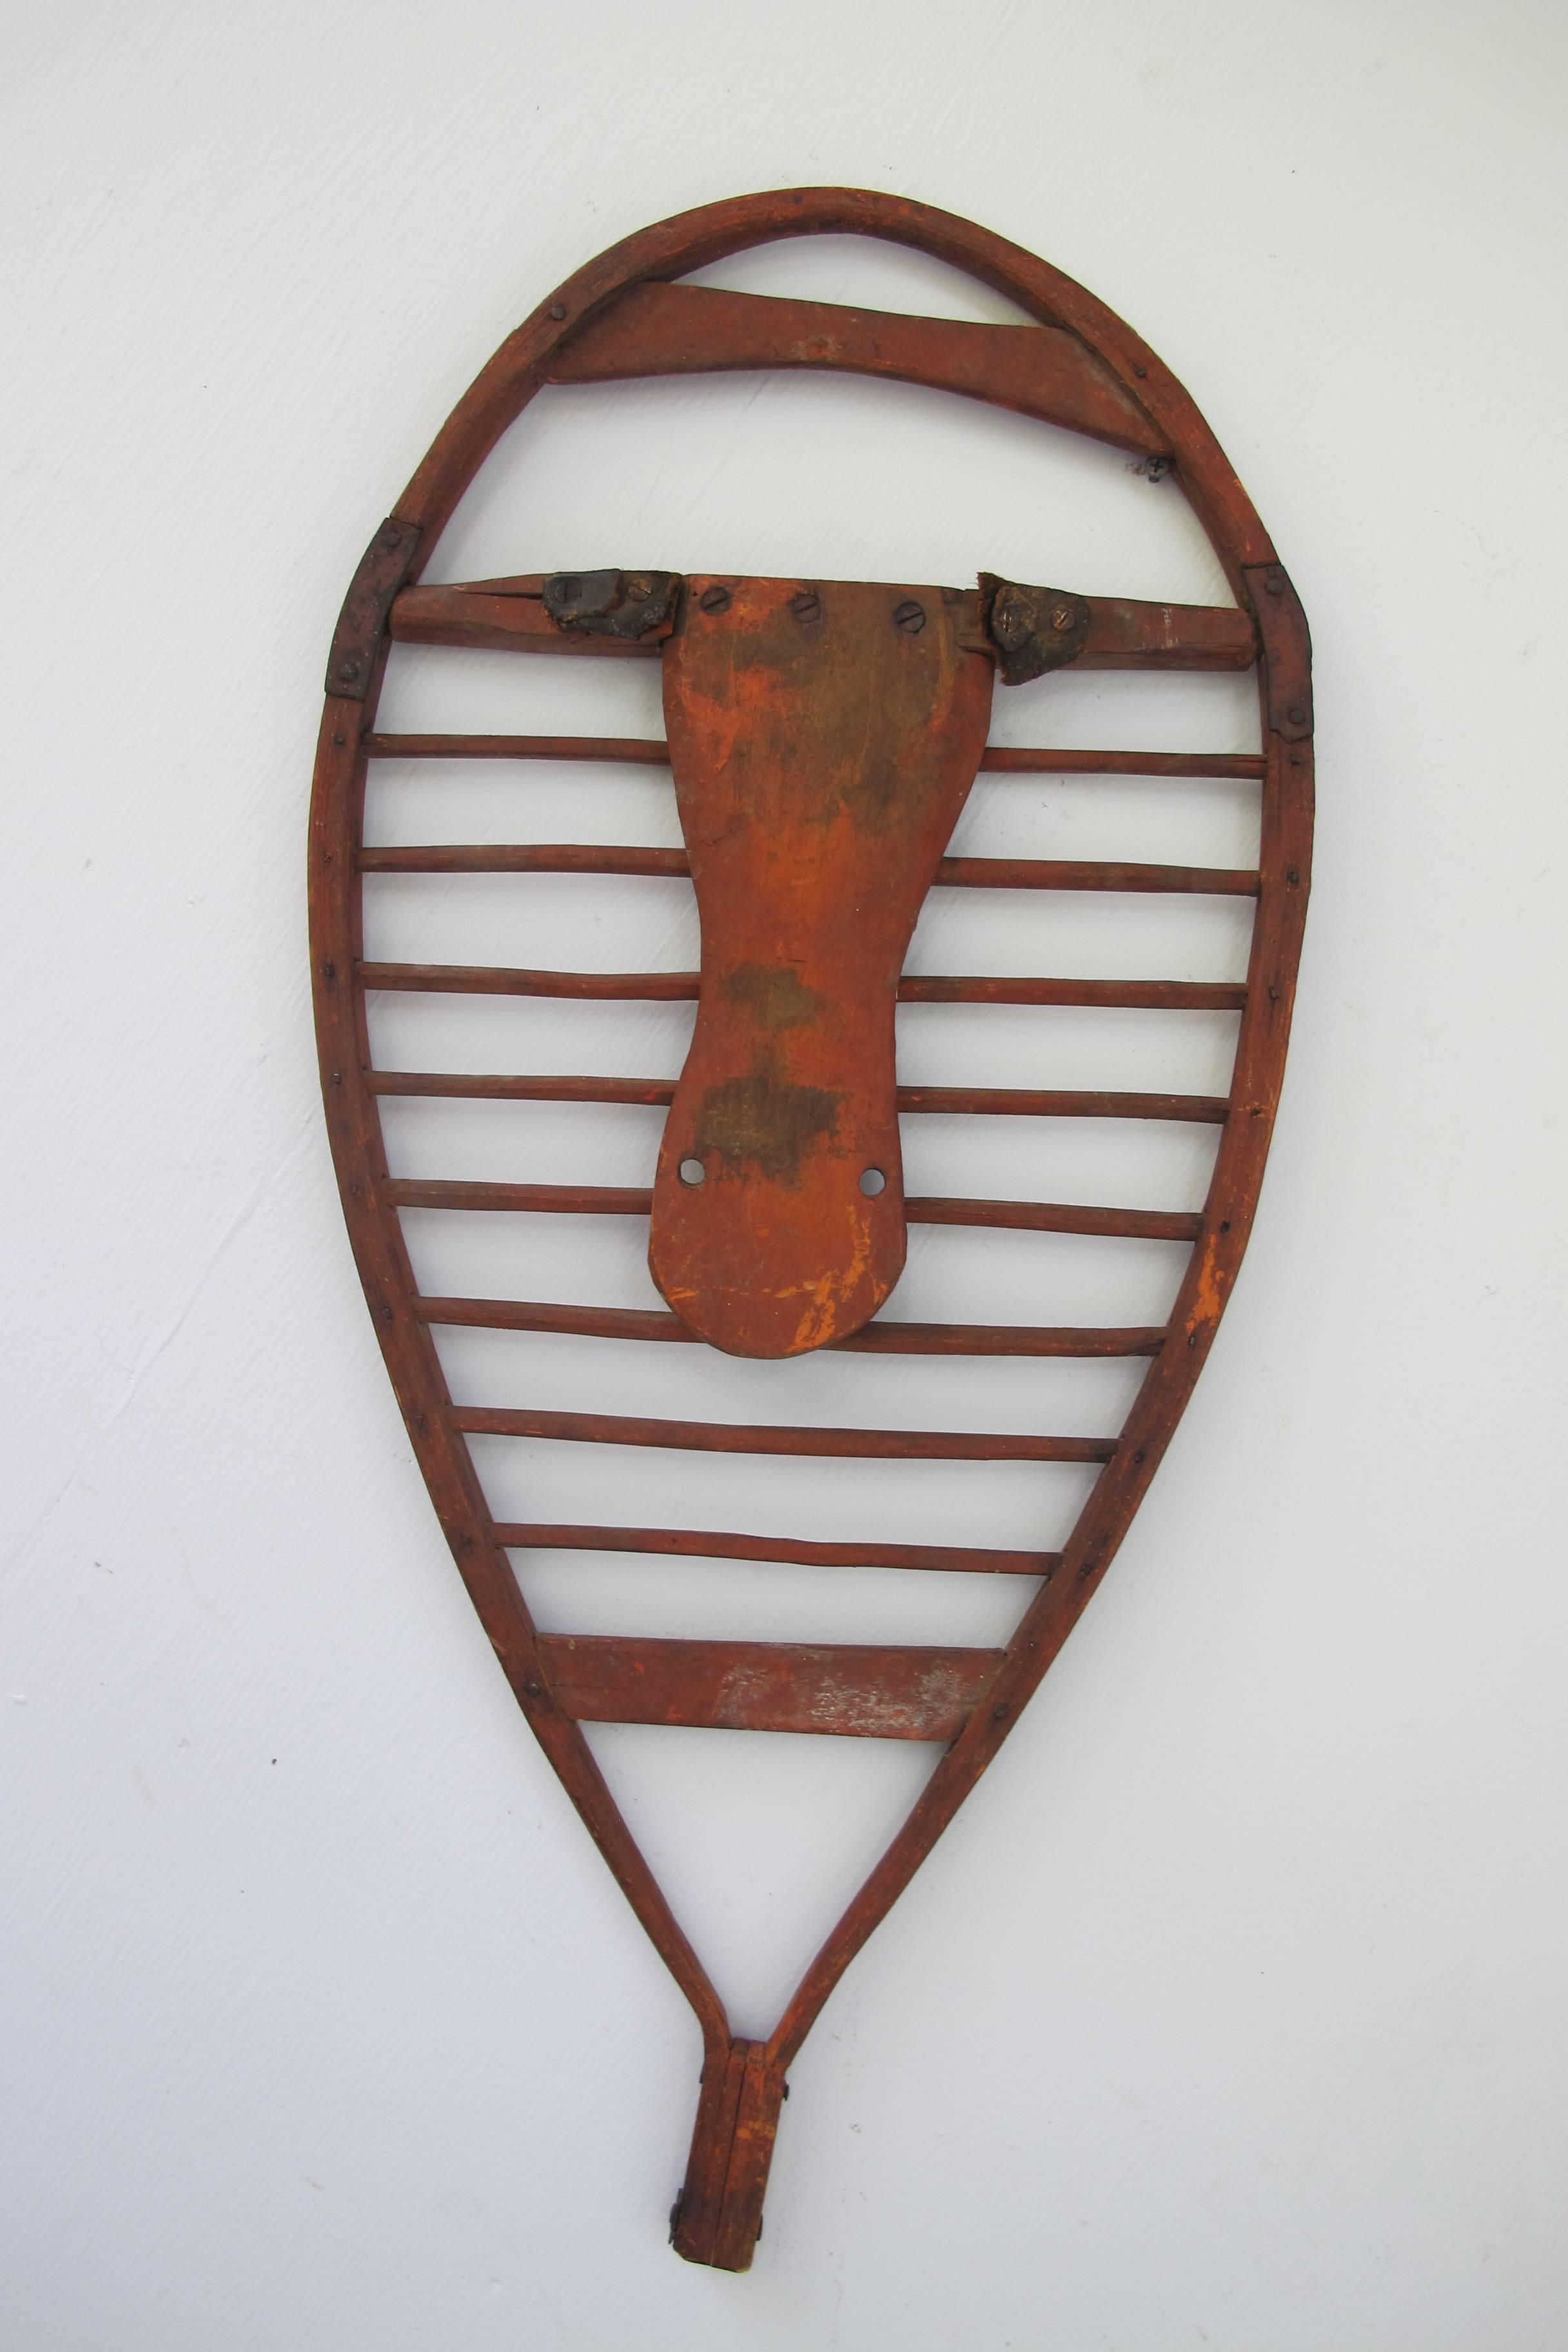 Rare pair of bentwood snowshoes with wood dowels crosspieces pegged to frame.
There are shaped wood pieces to strap on the boots with remains of old leather straps.
Wonderful old reddish brown wash on the surface. These were skillfully made and